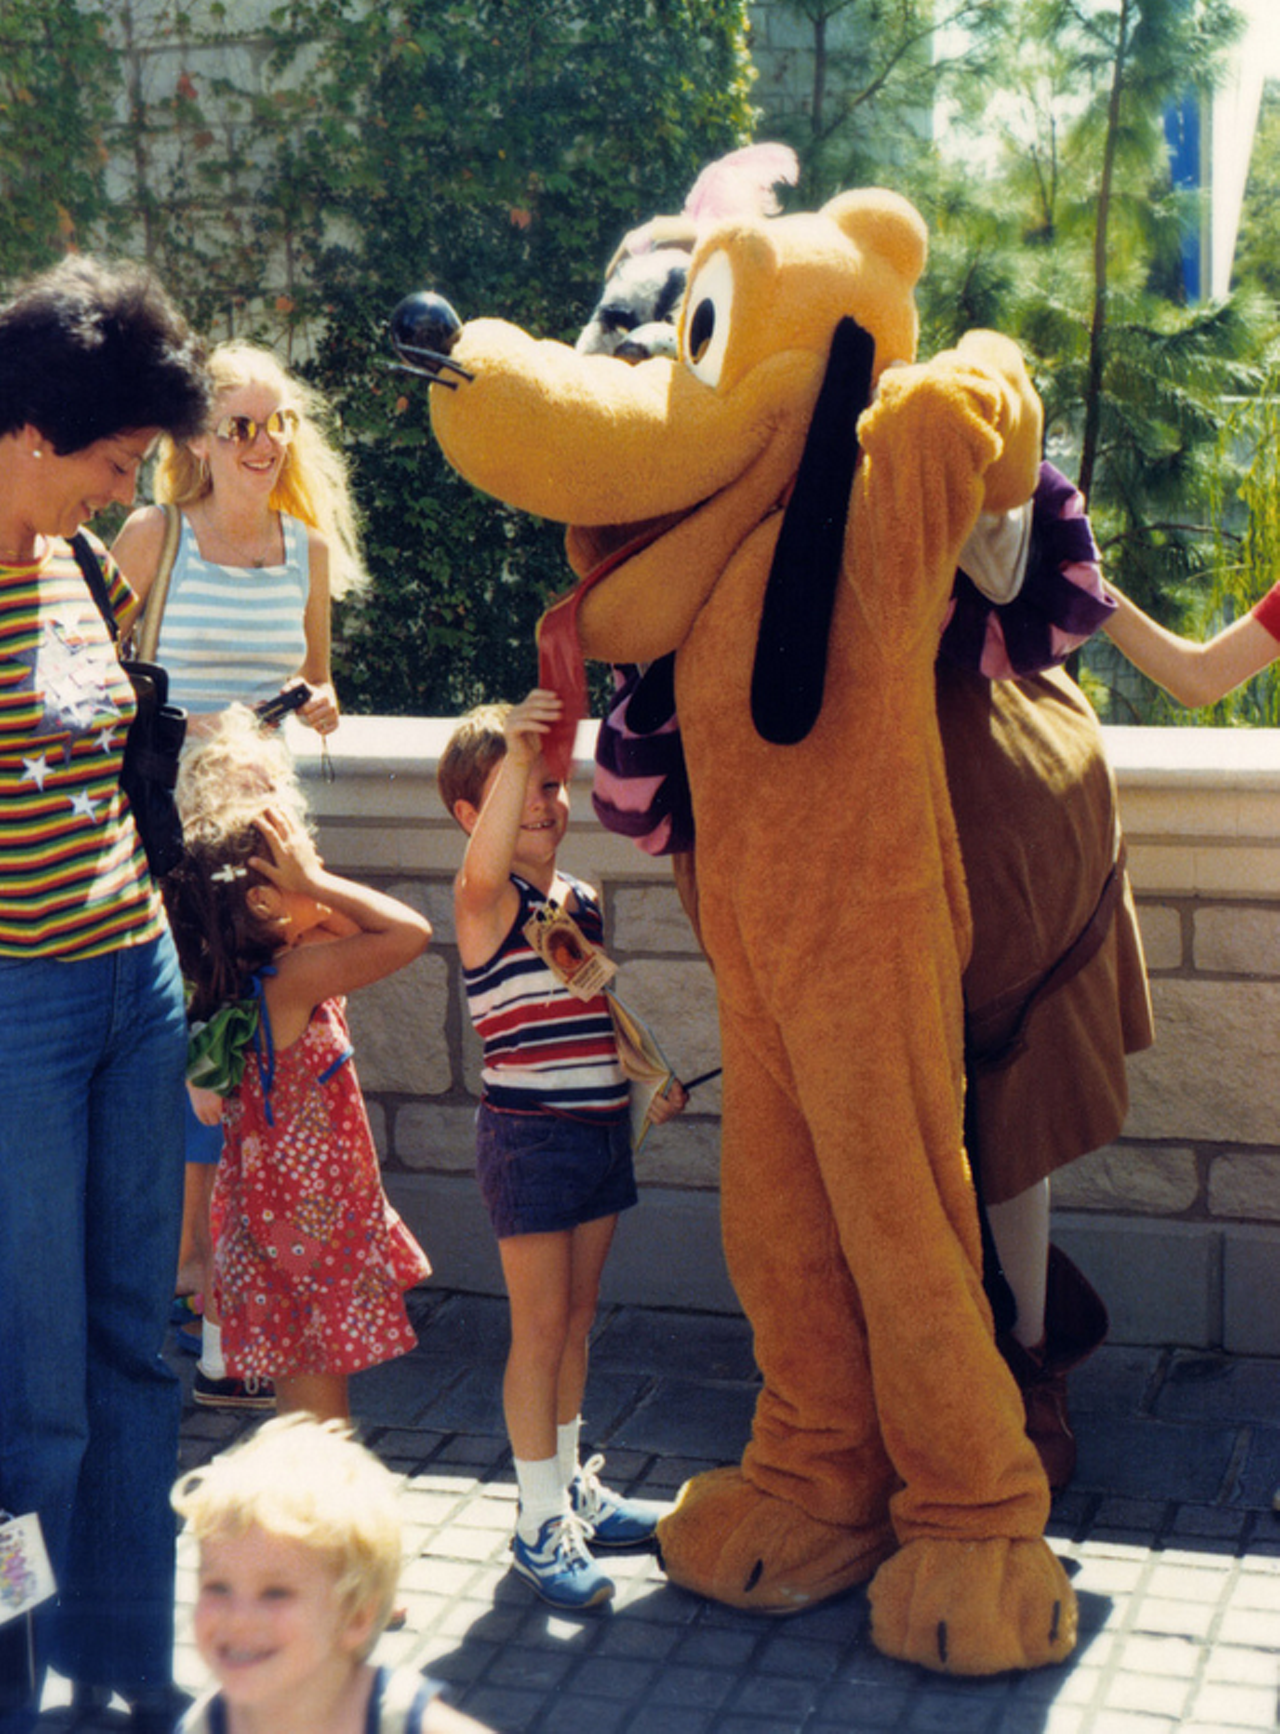 A character meet-and-greet with Pluto.